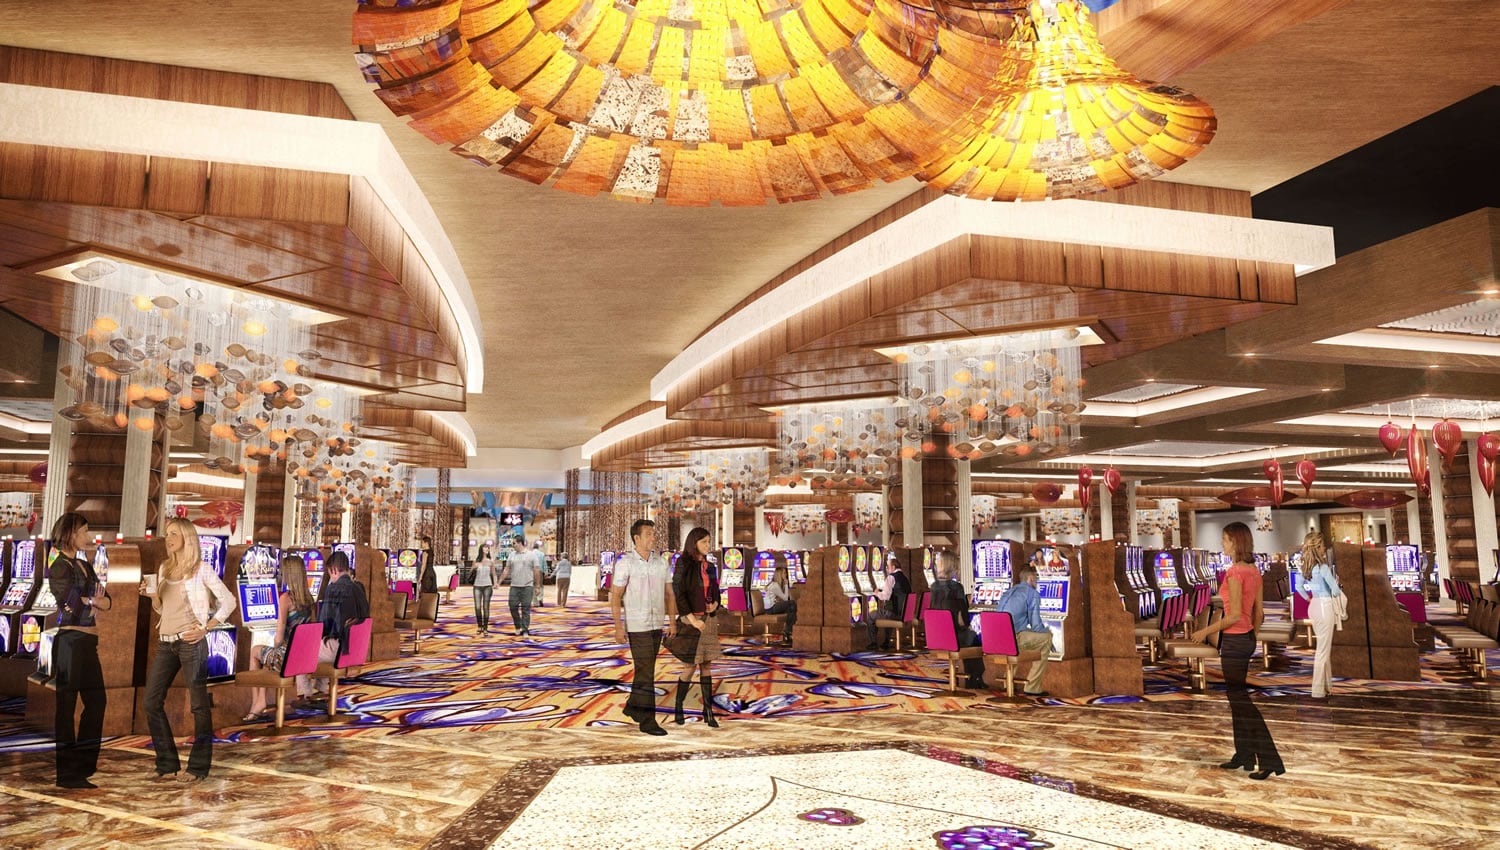 The Cowlitz casino shown in this artist&#039;s rendering will include a 100,000-square-foot gaming floor, meeting facilities and 15 different restaurants, bars and retail shops. It will feature 2,500 slots, 75 gaming tables, 60 high-limit slots and five high-limit tables.